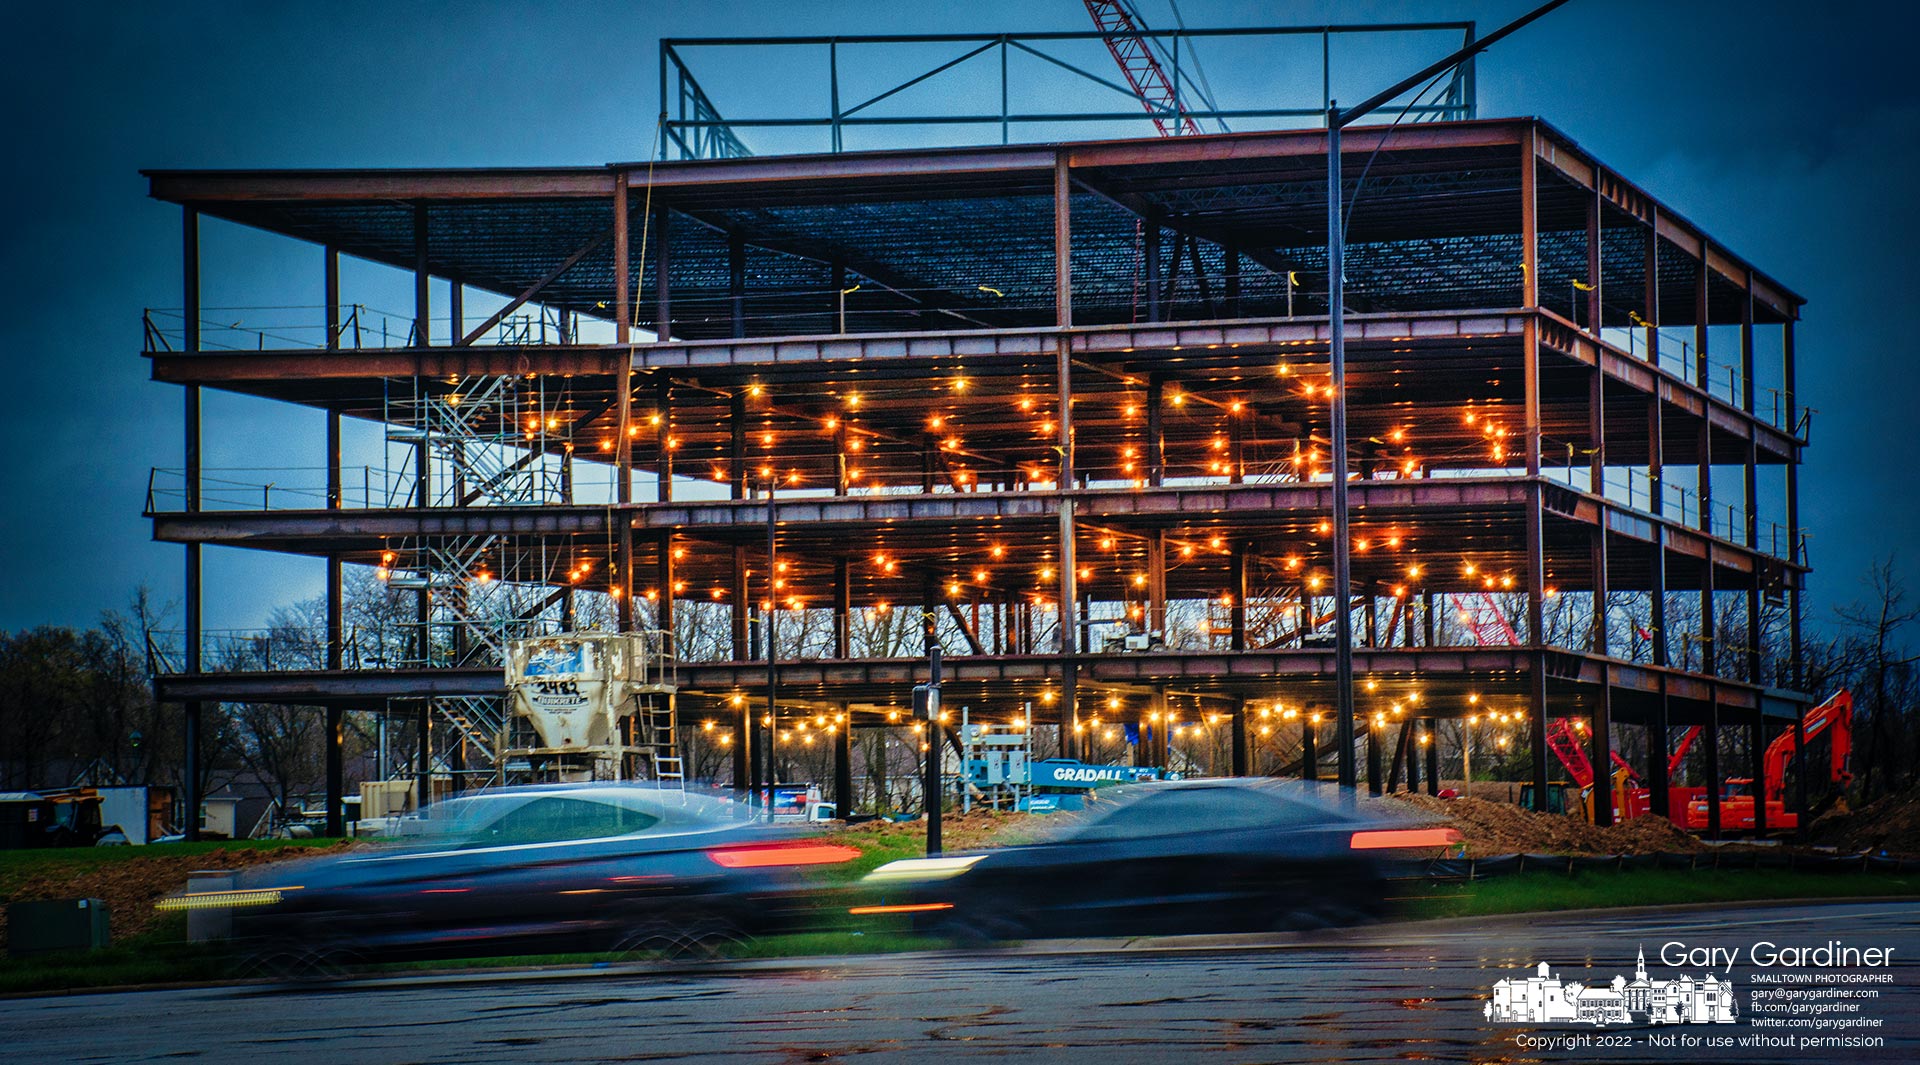 Early morning commuters pass the Orthopedic One offices a few minutes after sunrise when the steel structure is still lit by lights left on overnight to act as security lights. My Final Photo for April 14, 2022.